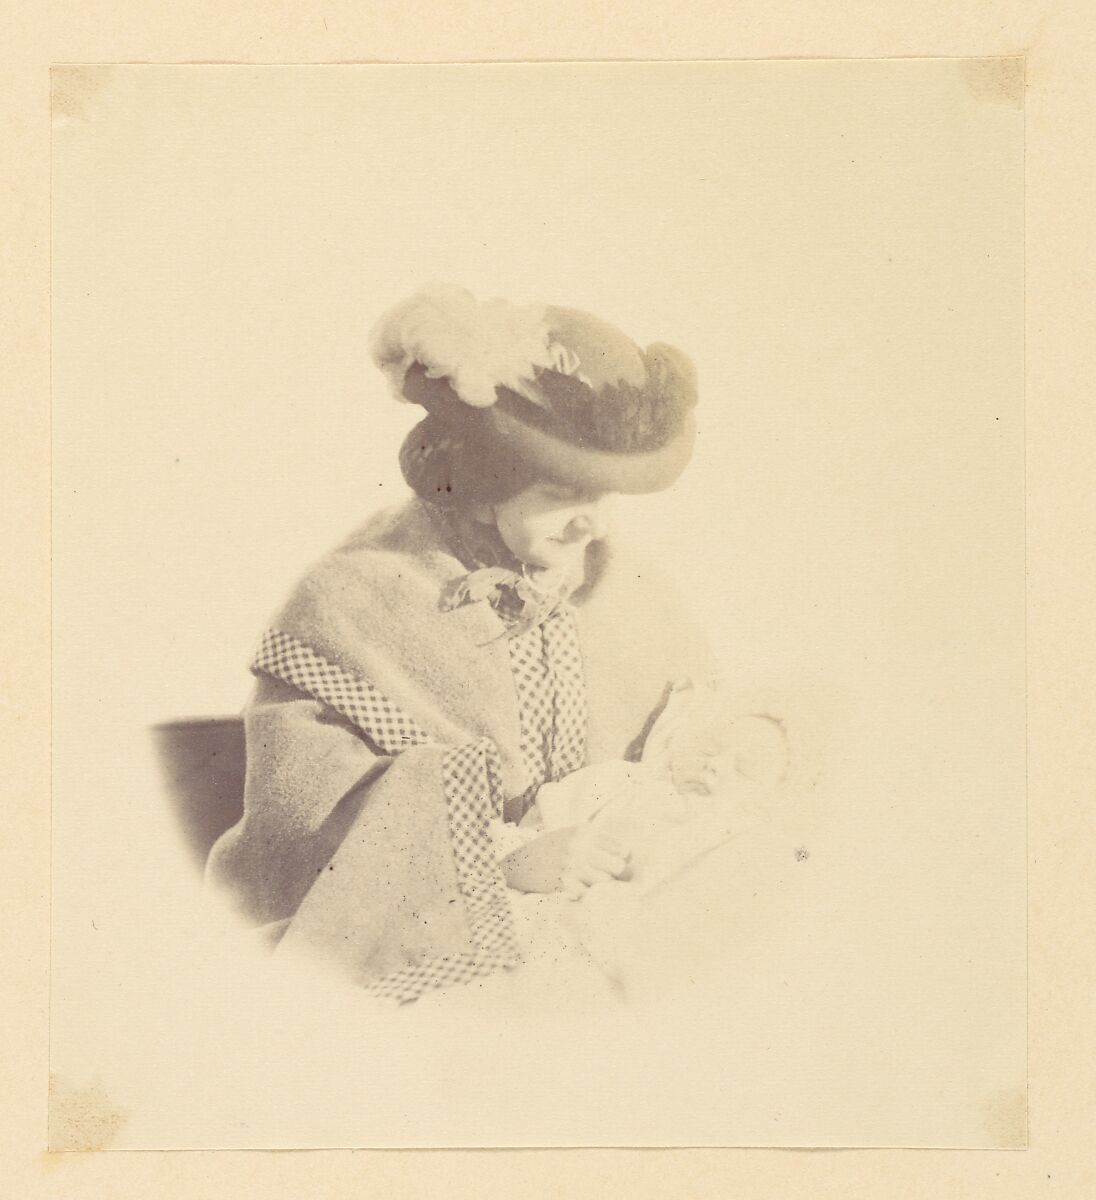 [Vignetted portrait, woman holding a baby], Alfred Capel Cure (British, 1826–1896), Albumen silver print from glass negative 